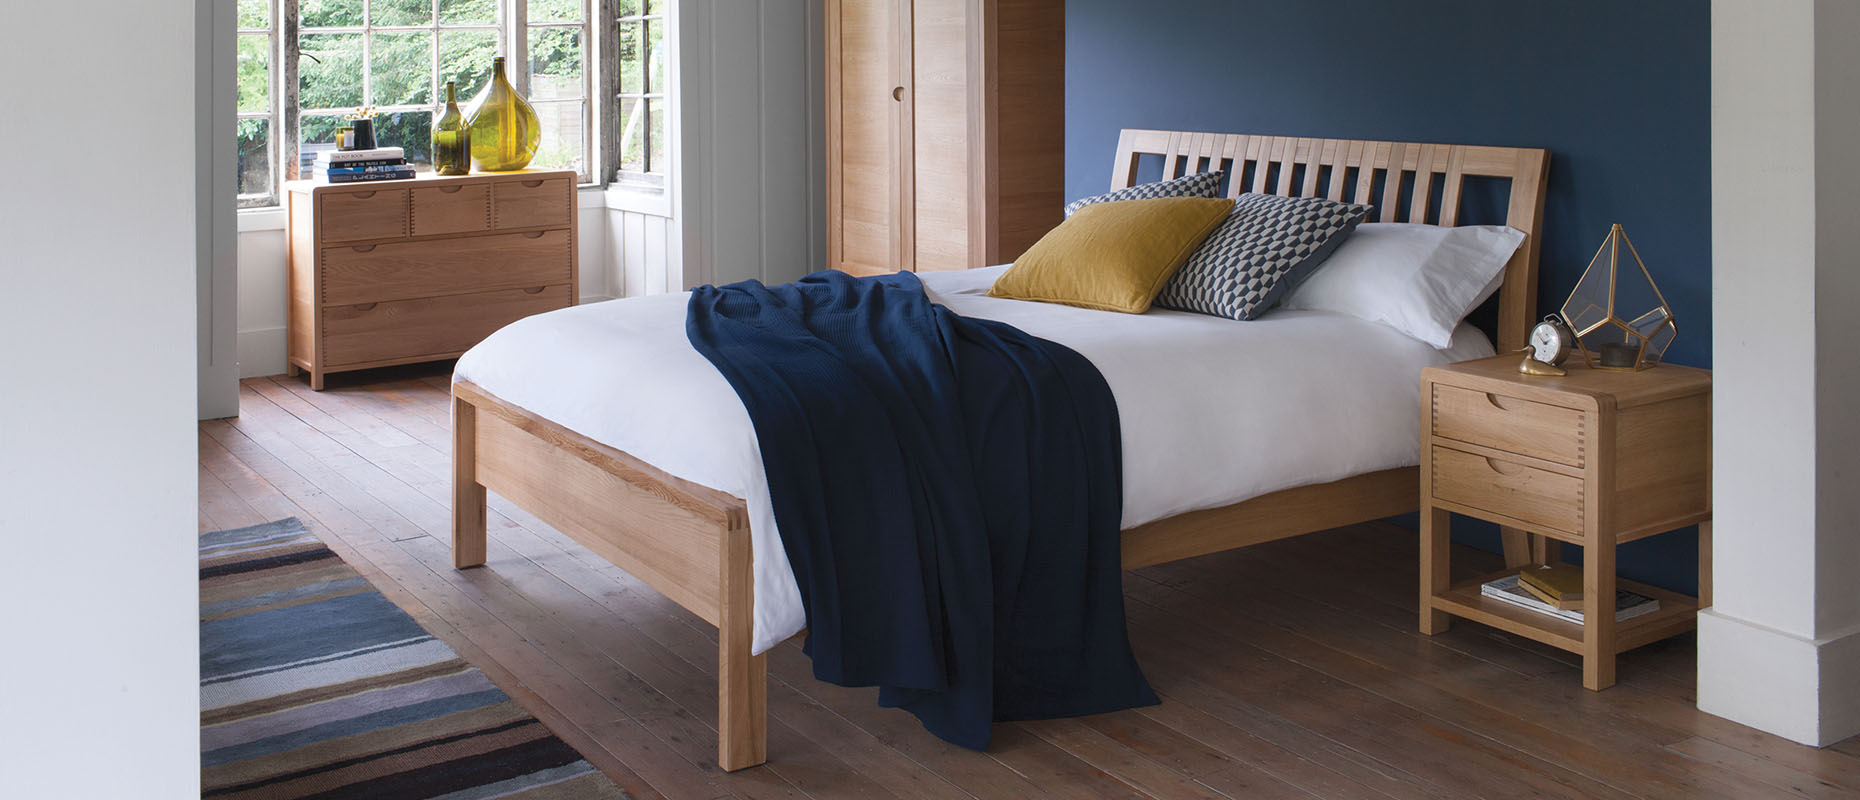 Bosco Bedframe collection from Ercol at Forrest Furnishing